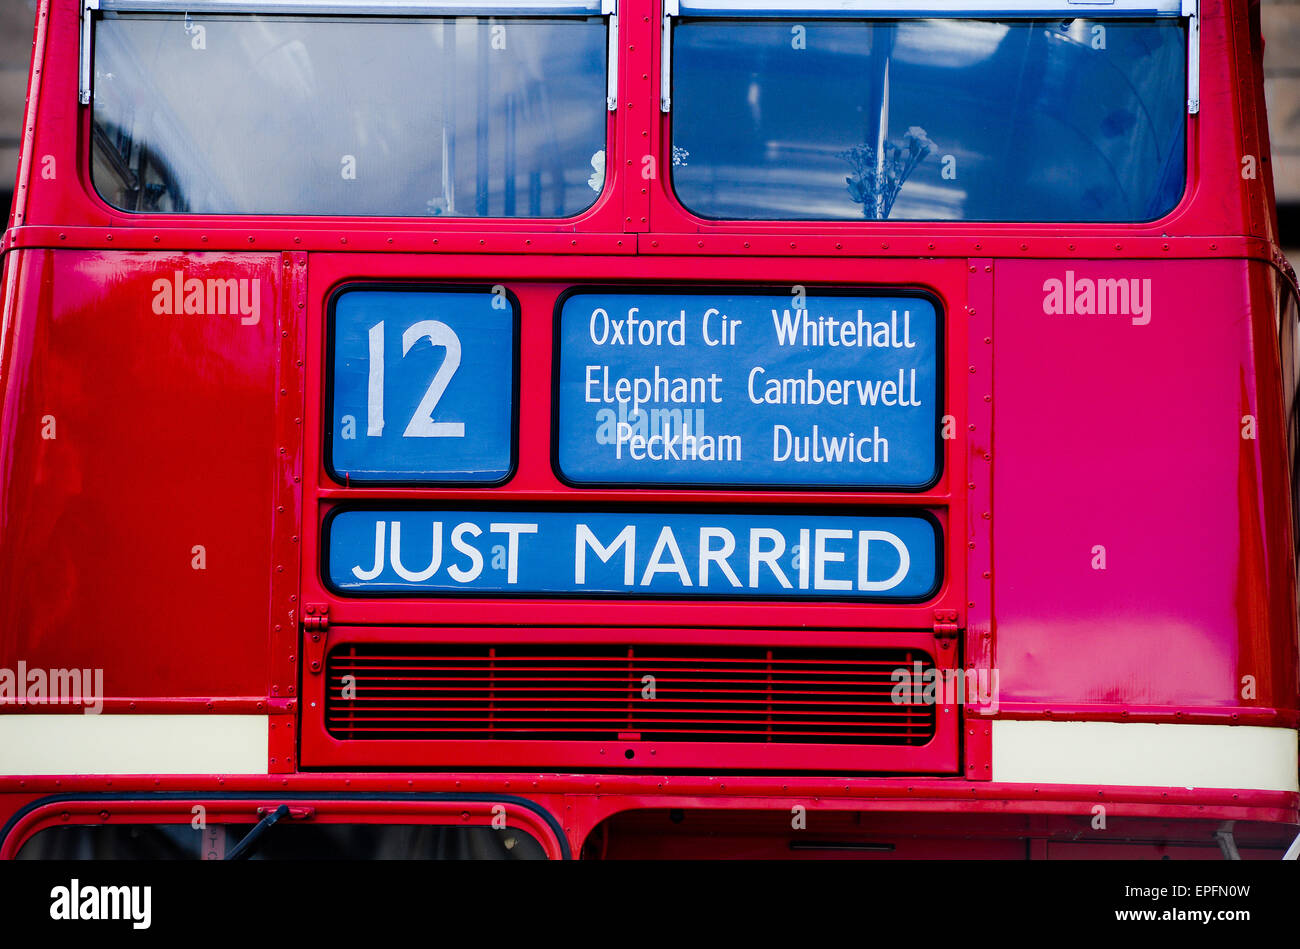 Just Married on a Red Bus Stock Photo